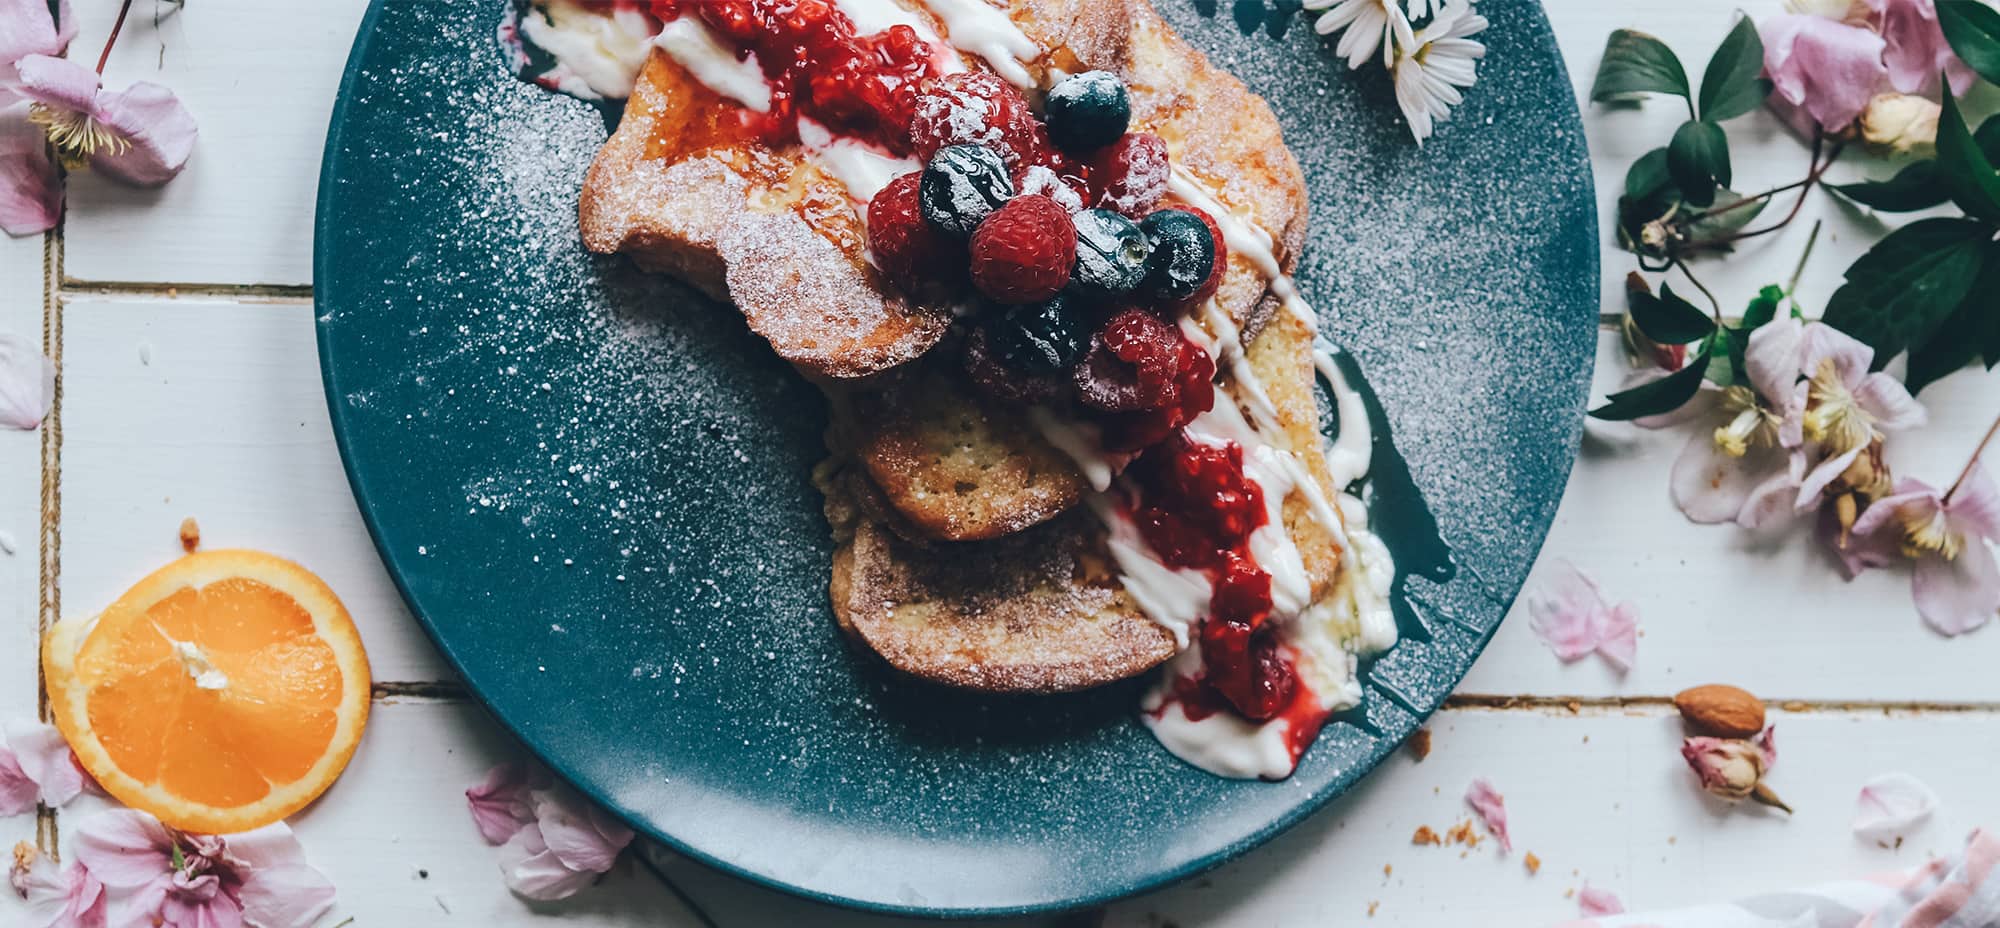 This photo is of French toast presented with fresh berries